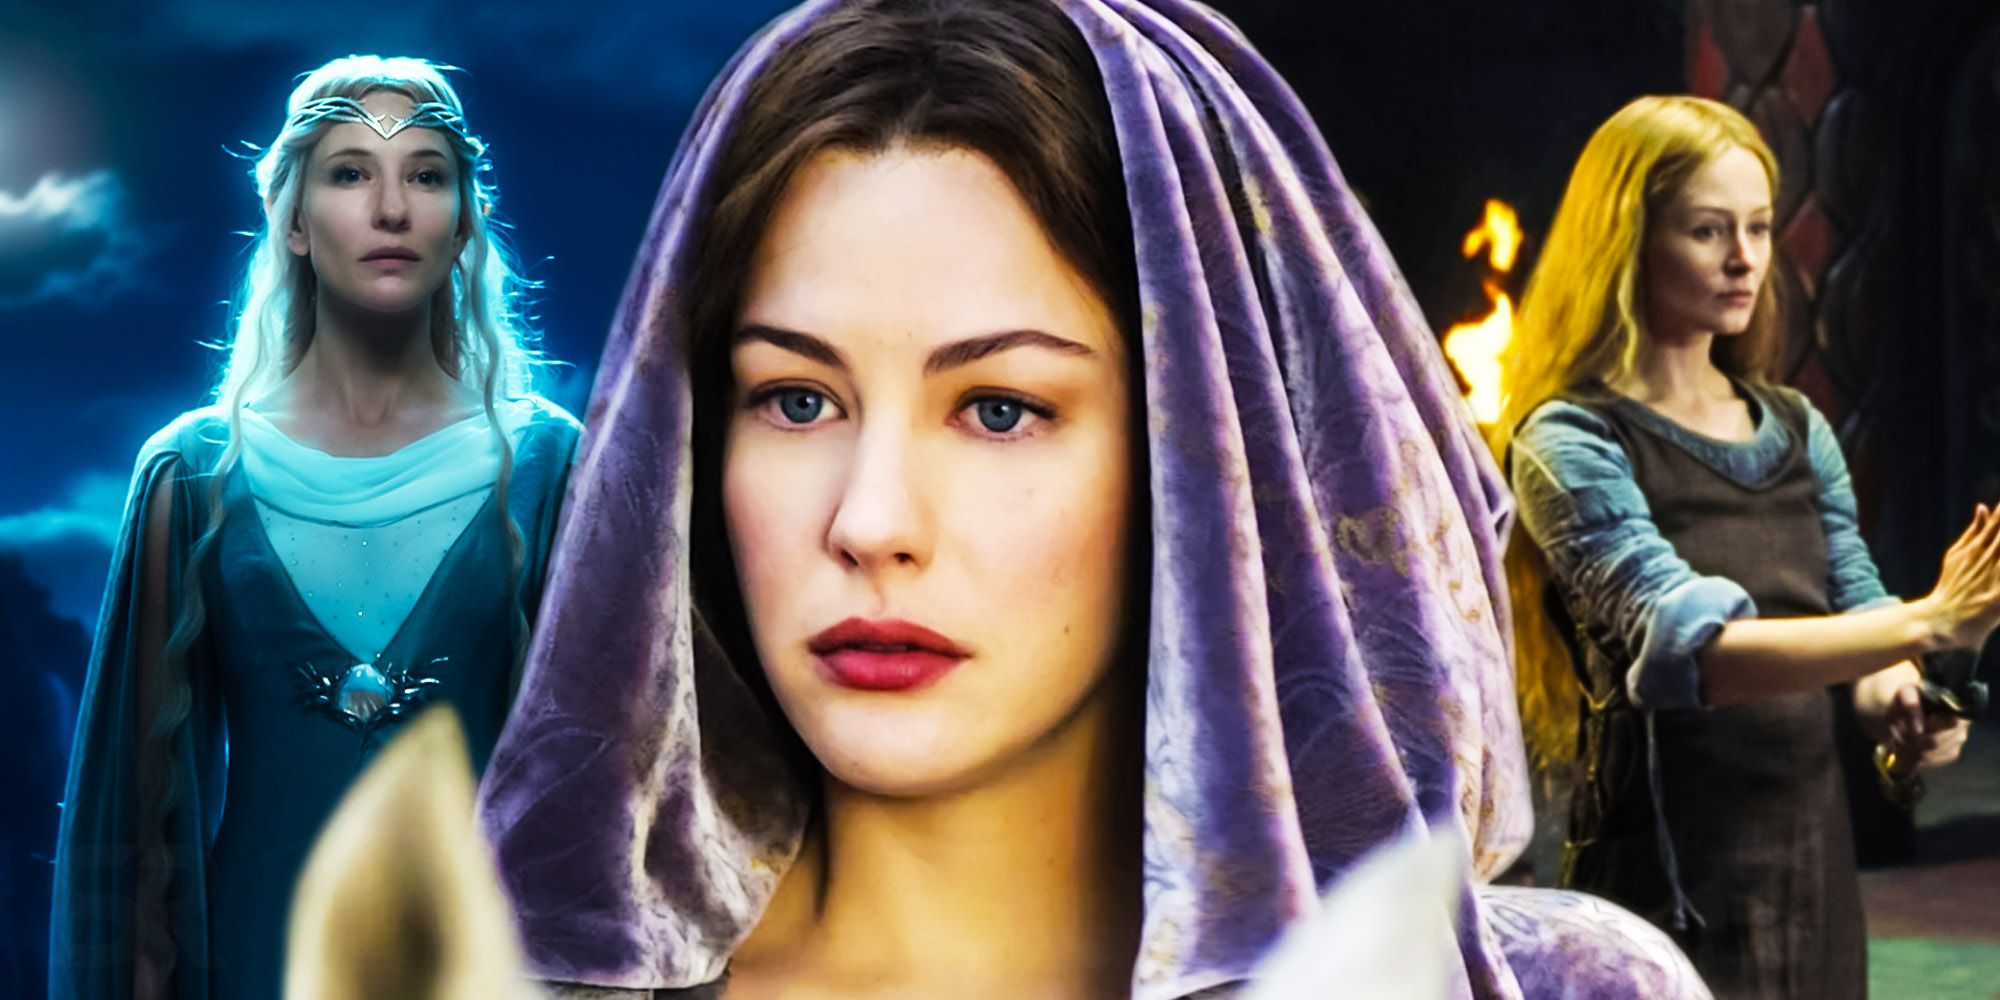 10 Awesome Female Characters The Lord Of The Rings Doesn't Show